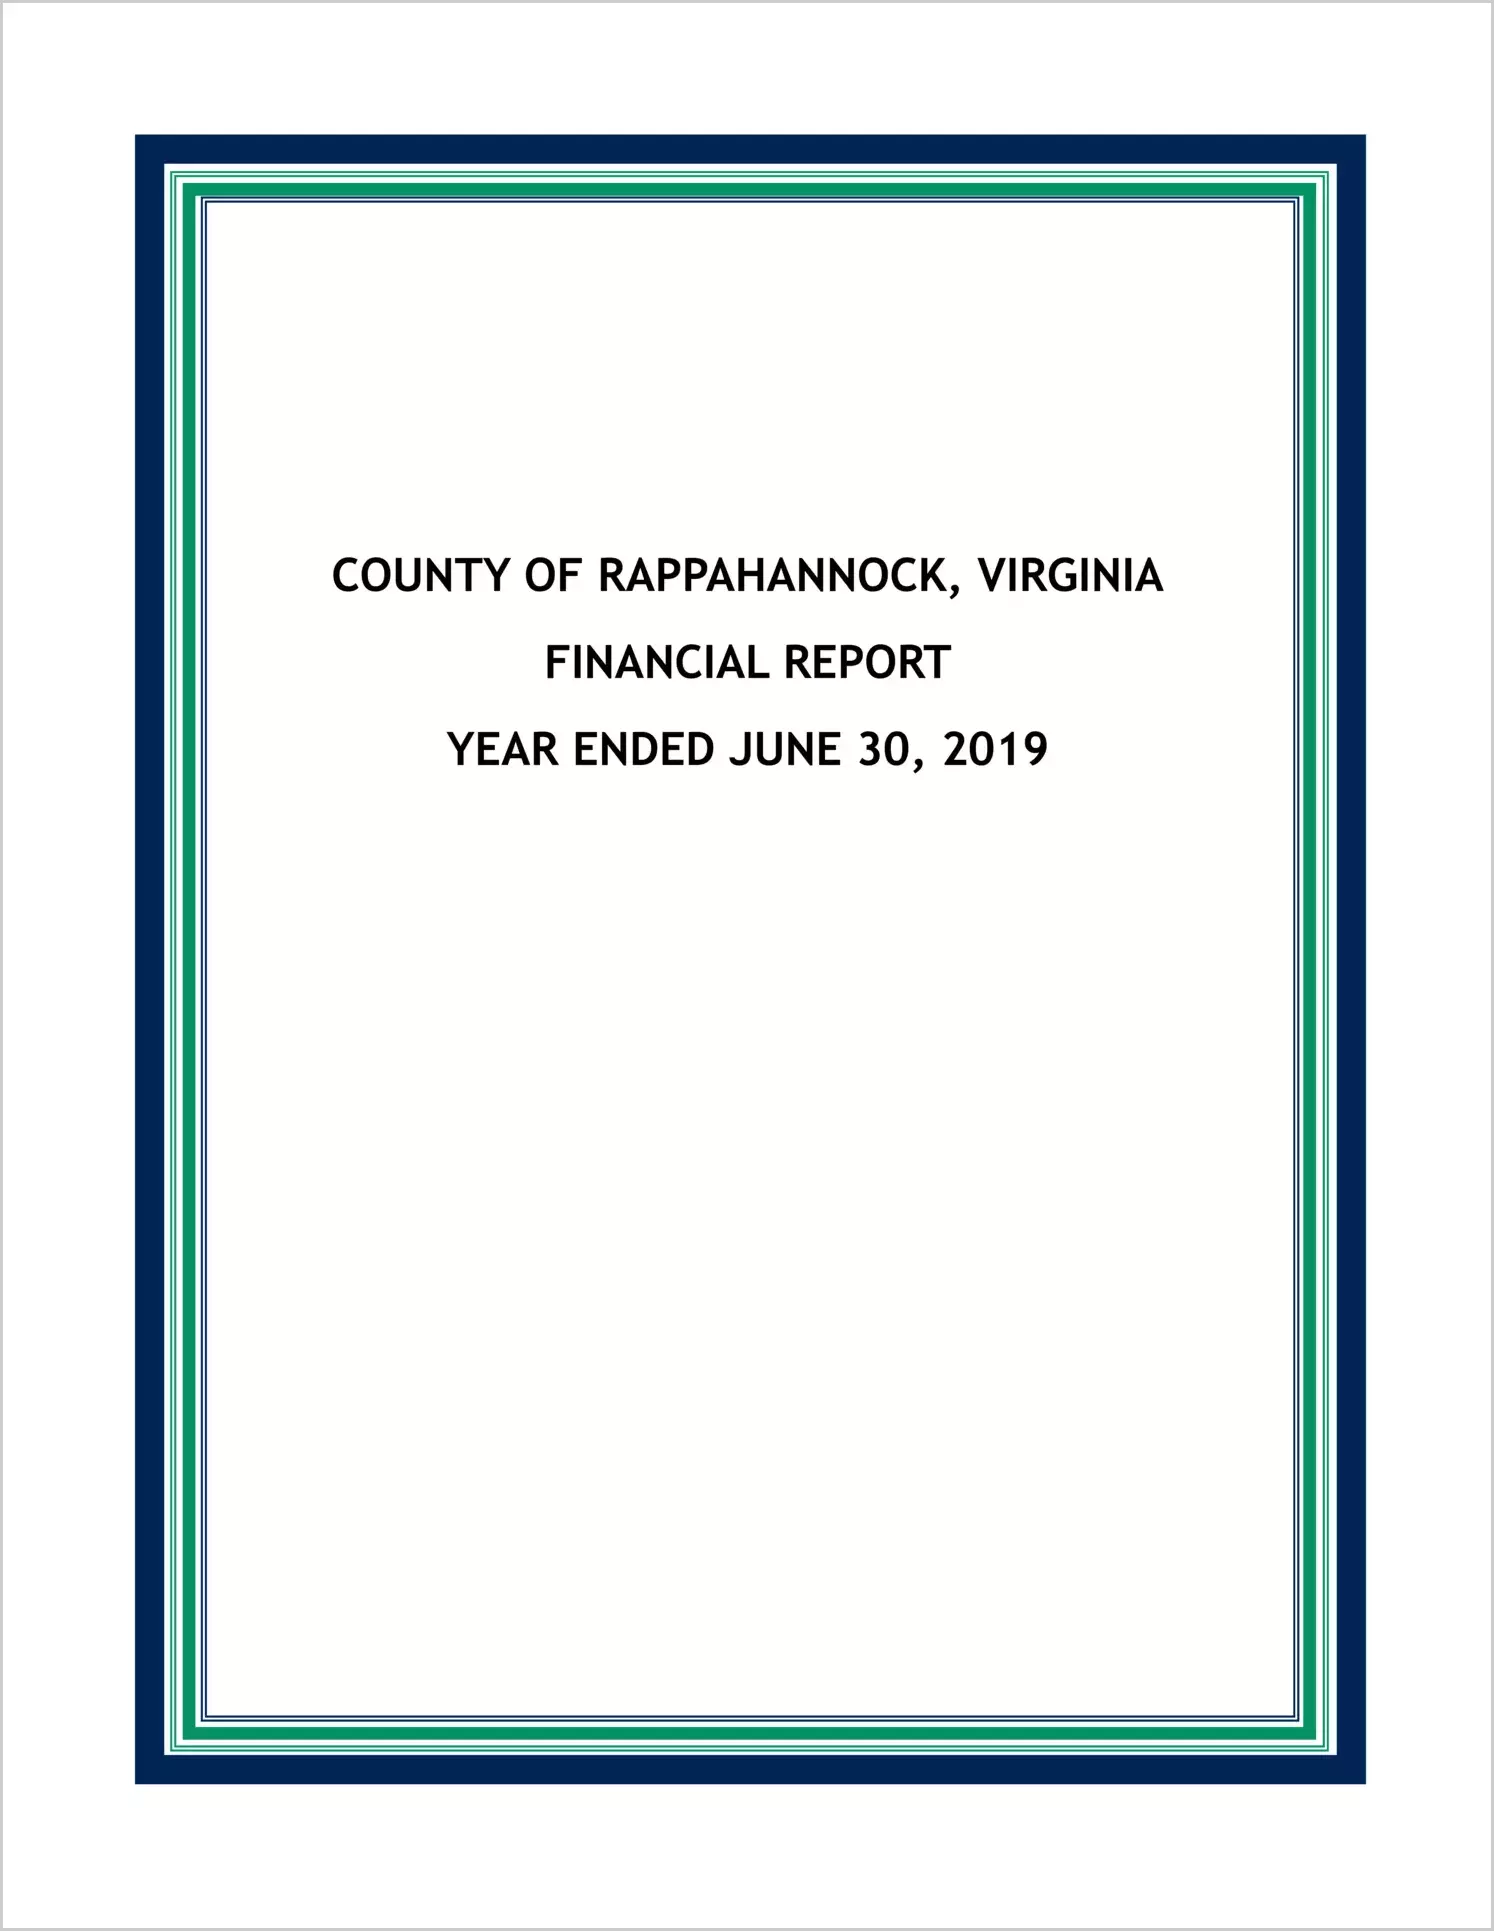 2019 Annual Financial Report for County of Rappahannock